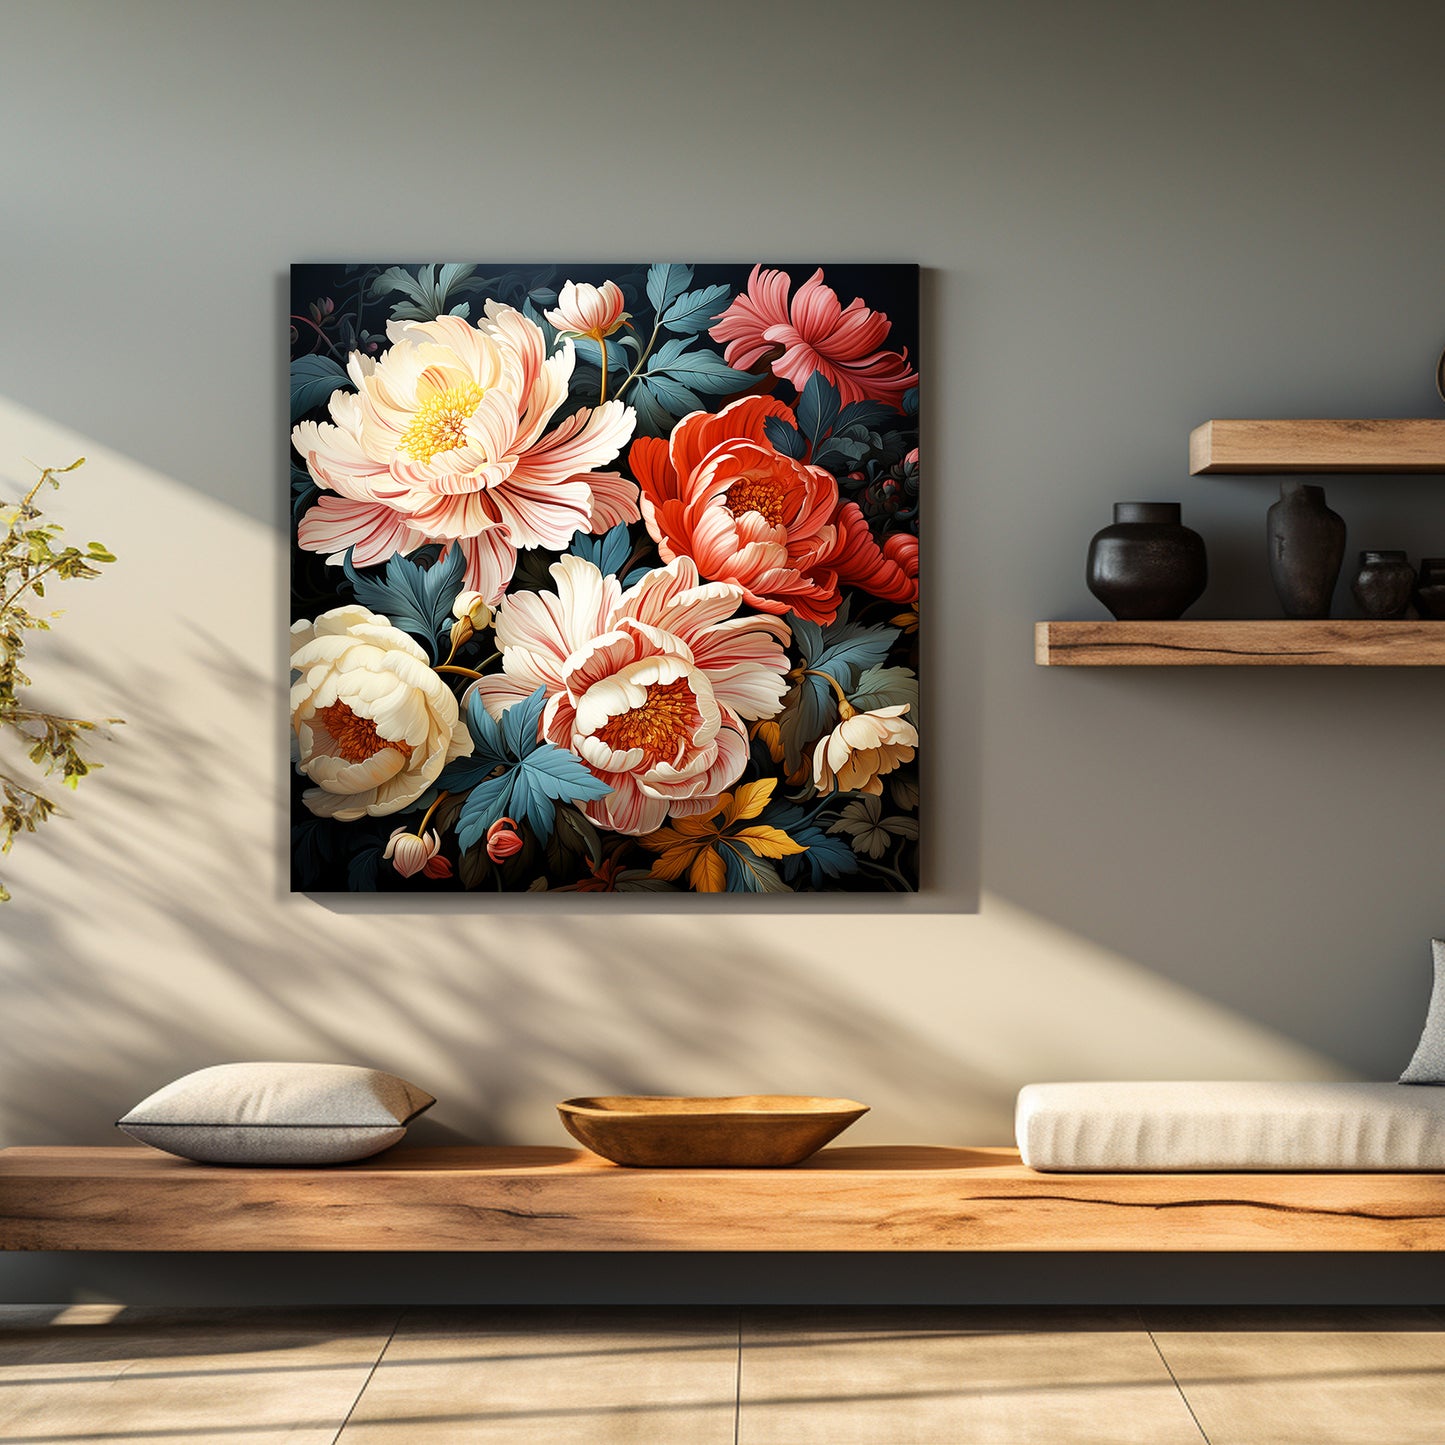 Beautiful Floral Canvas Painting for Living Room Bedroom Home and Office Wall Decor